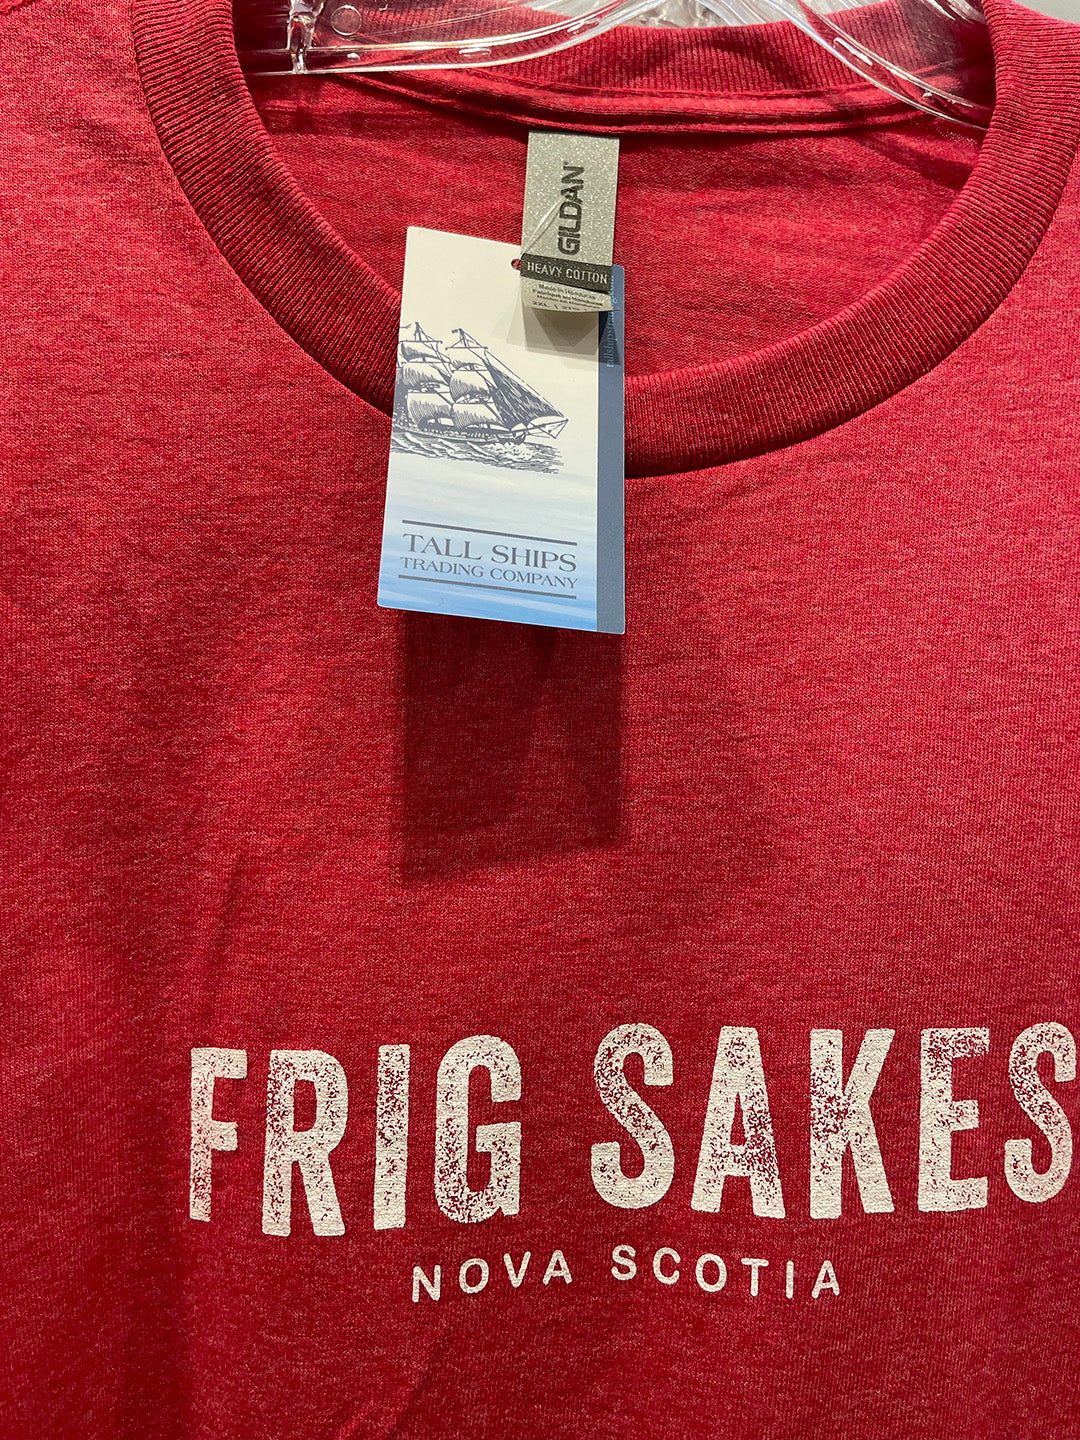 frig sakes t-shirt that was made by a competitor who stole our ideas